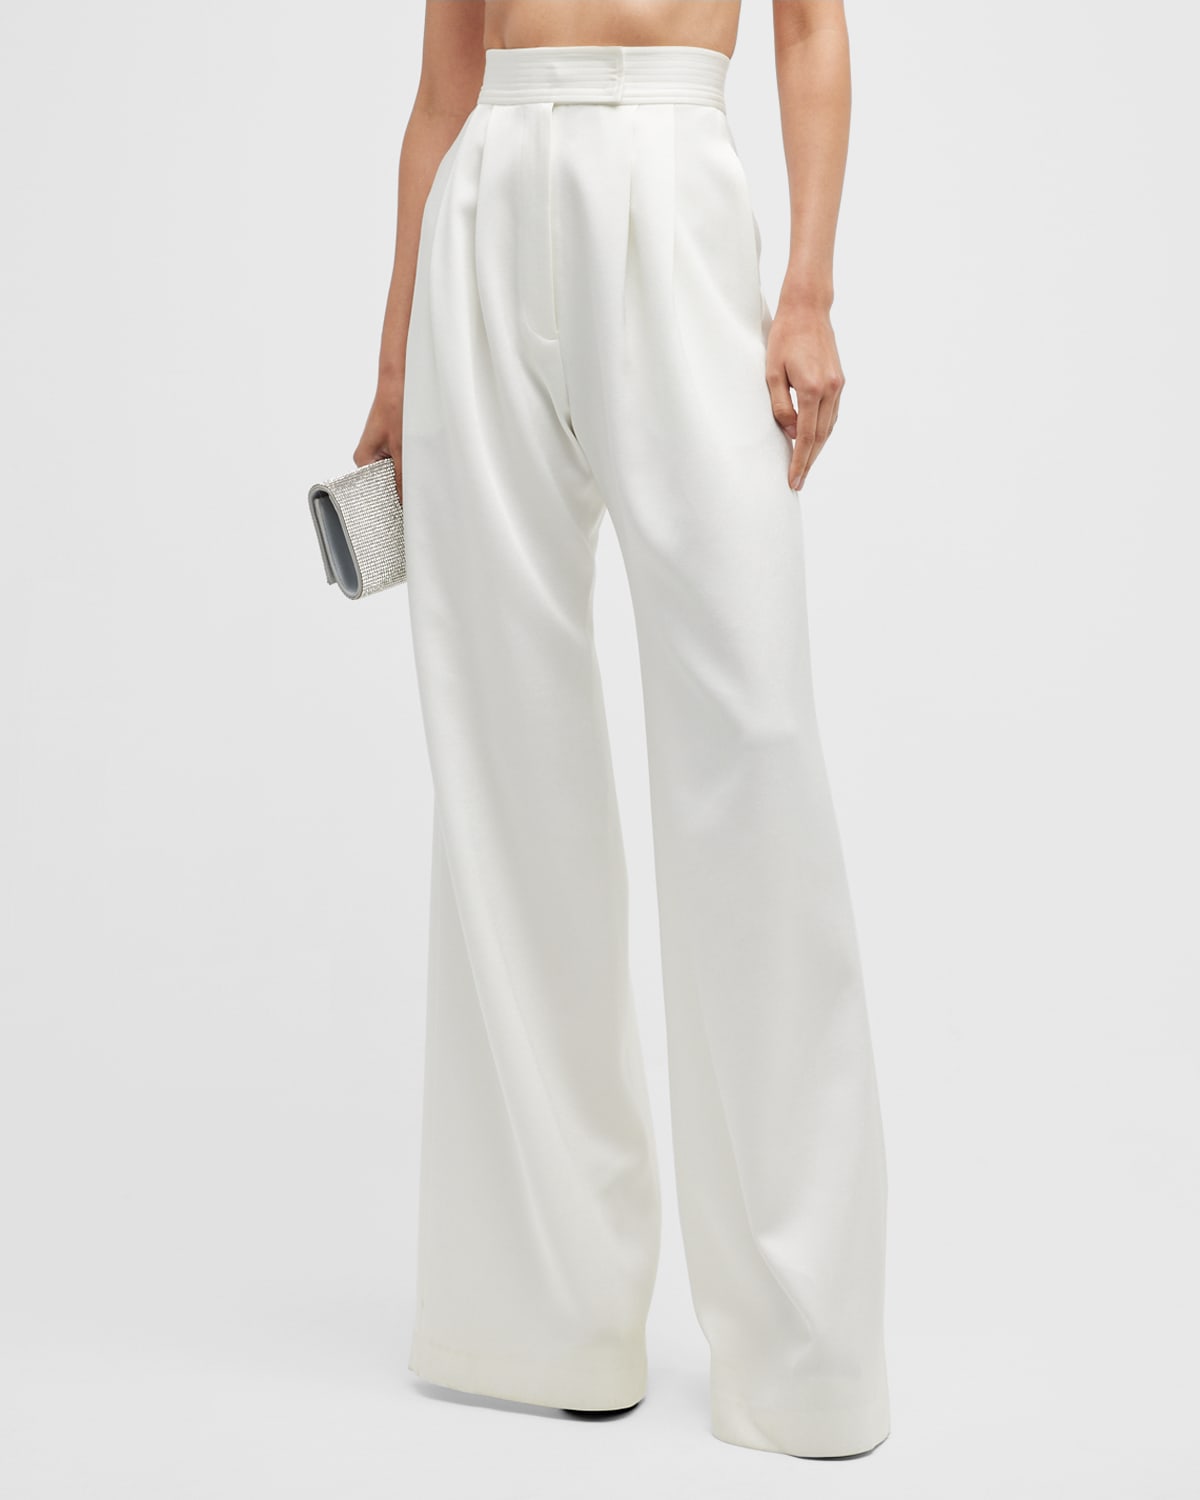 Alex Perry Cadence Pleated Wide-leg Pants In White